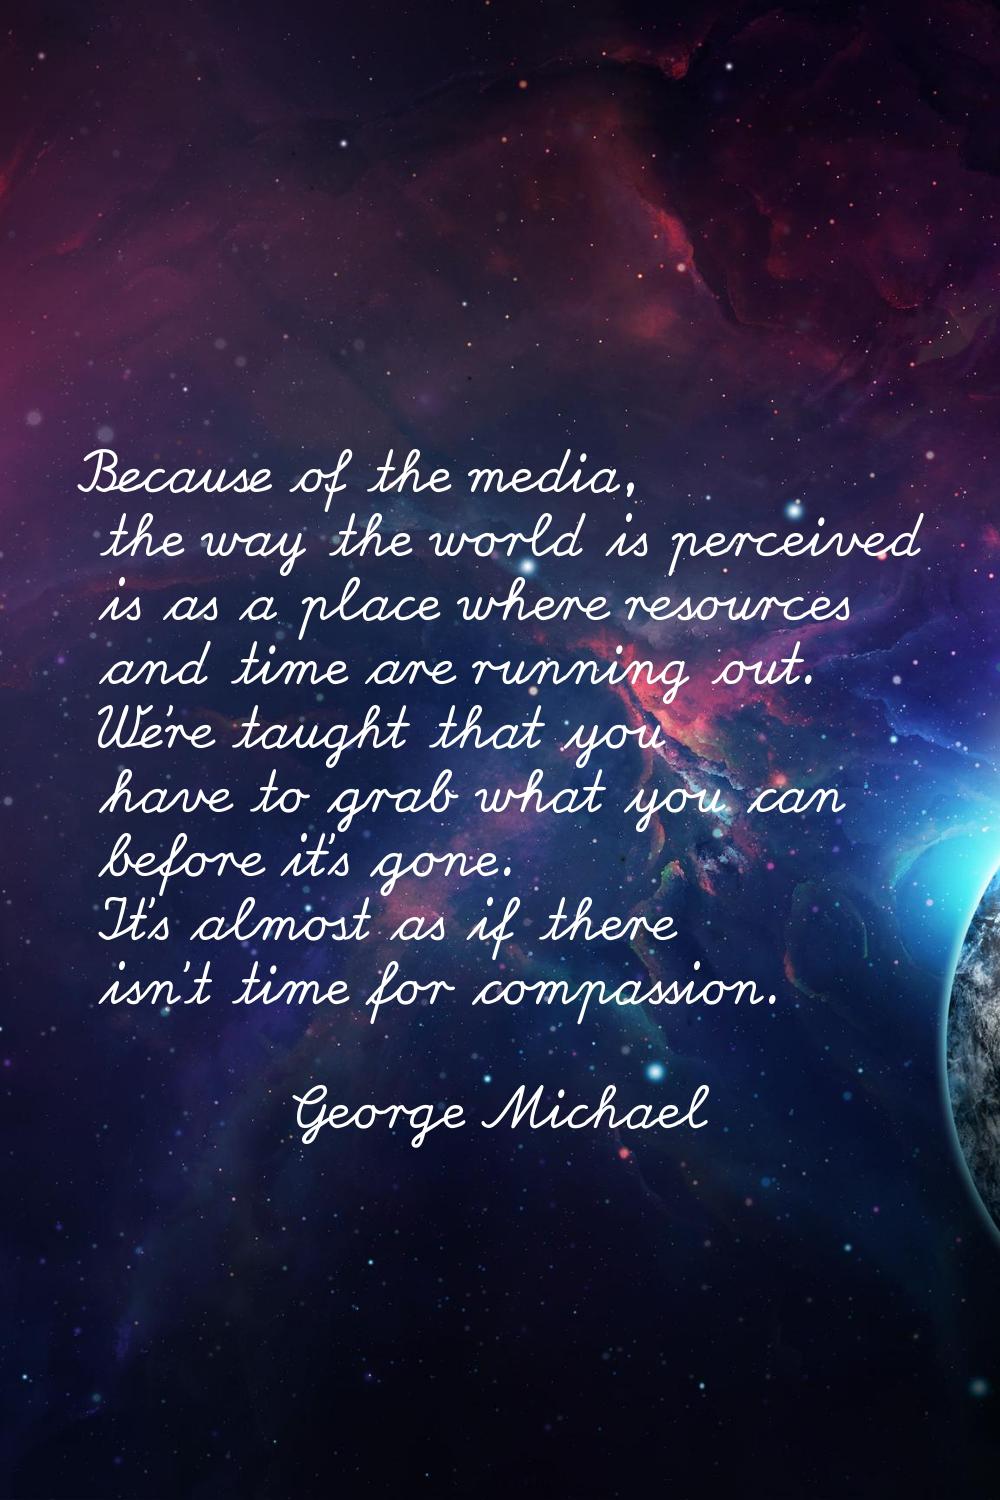 Because of the media, the way the world is perceived is as a place where resources and time are run